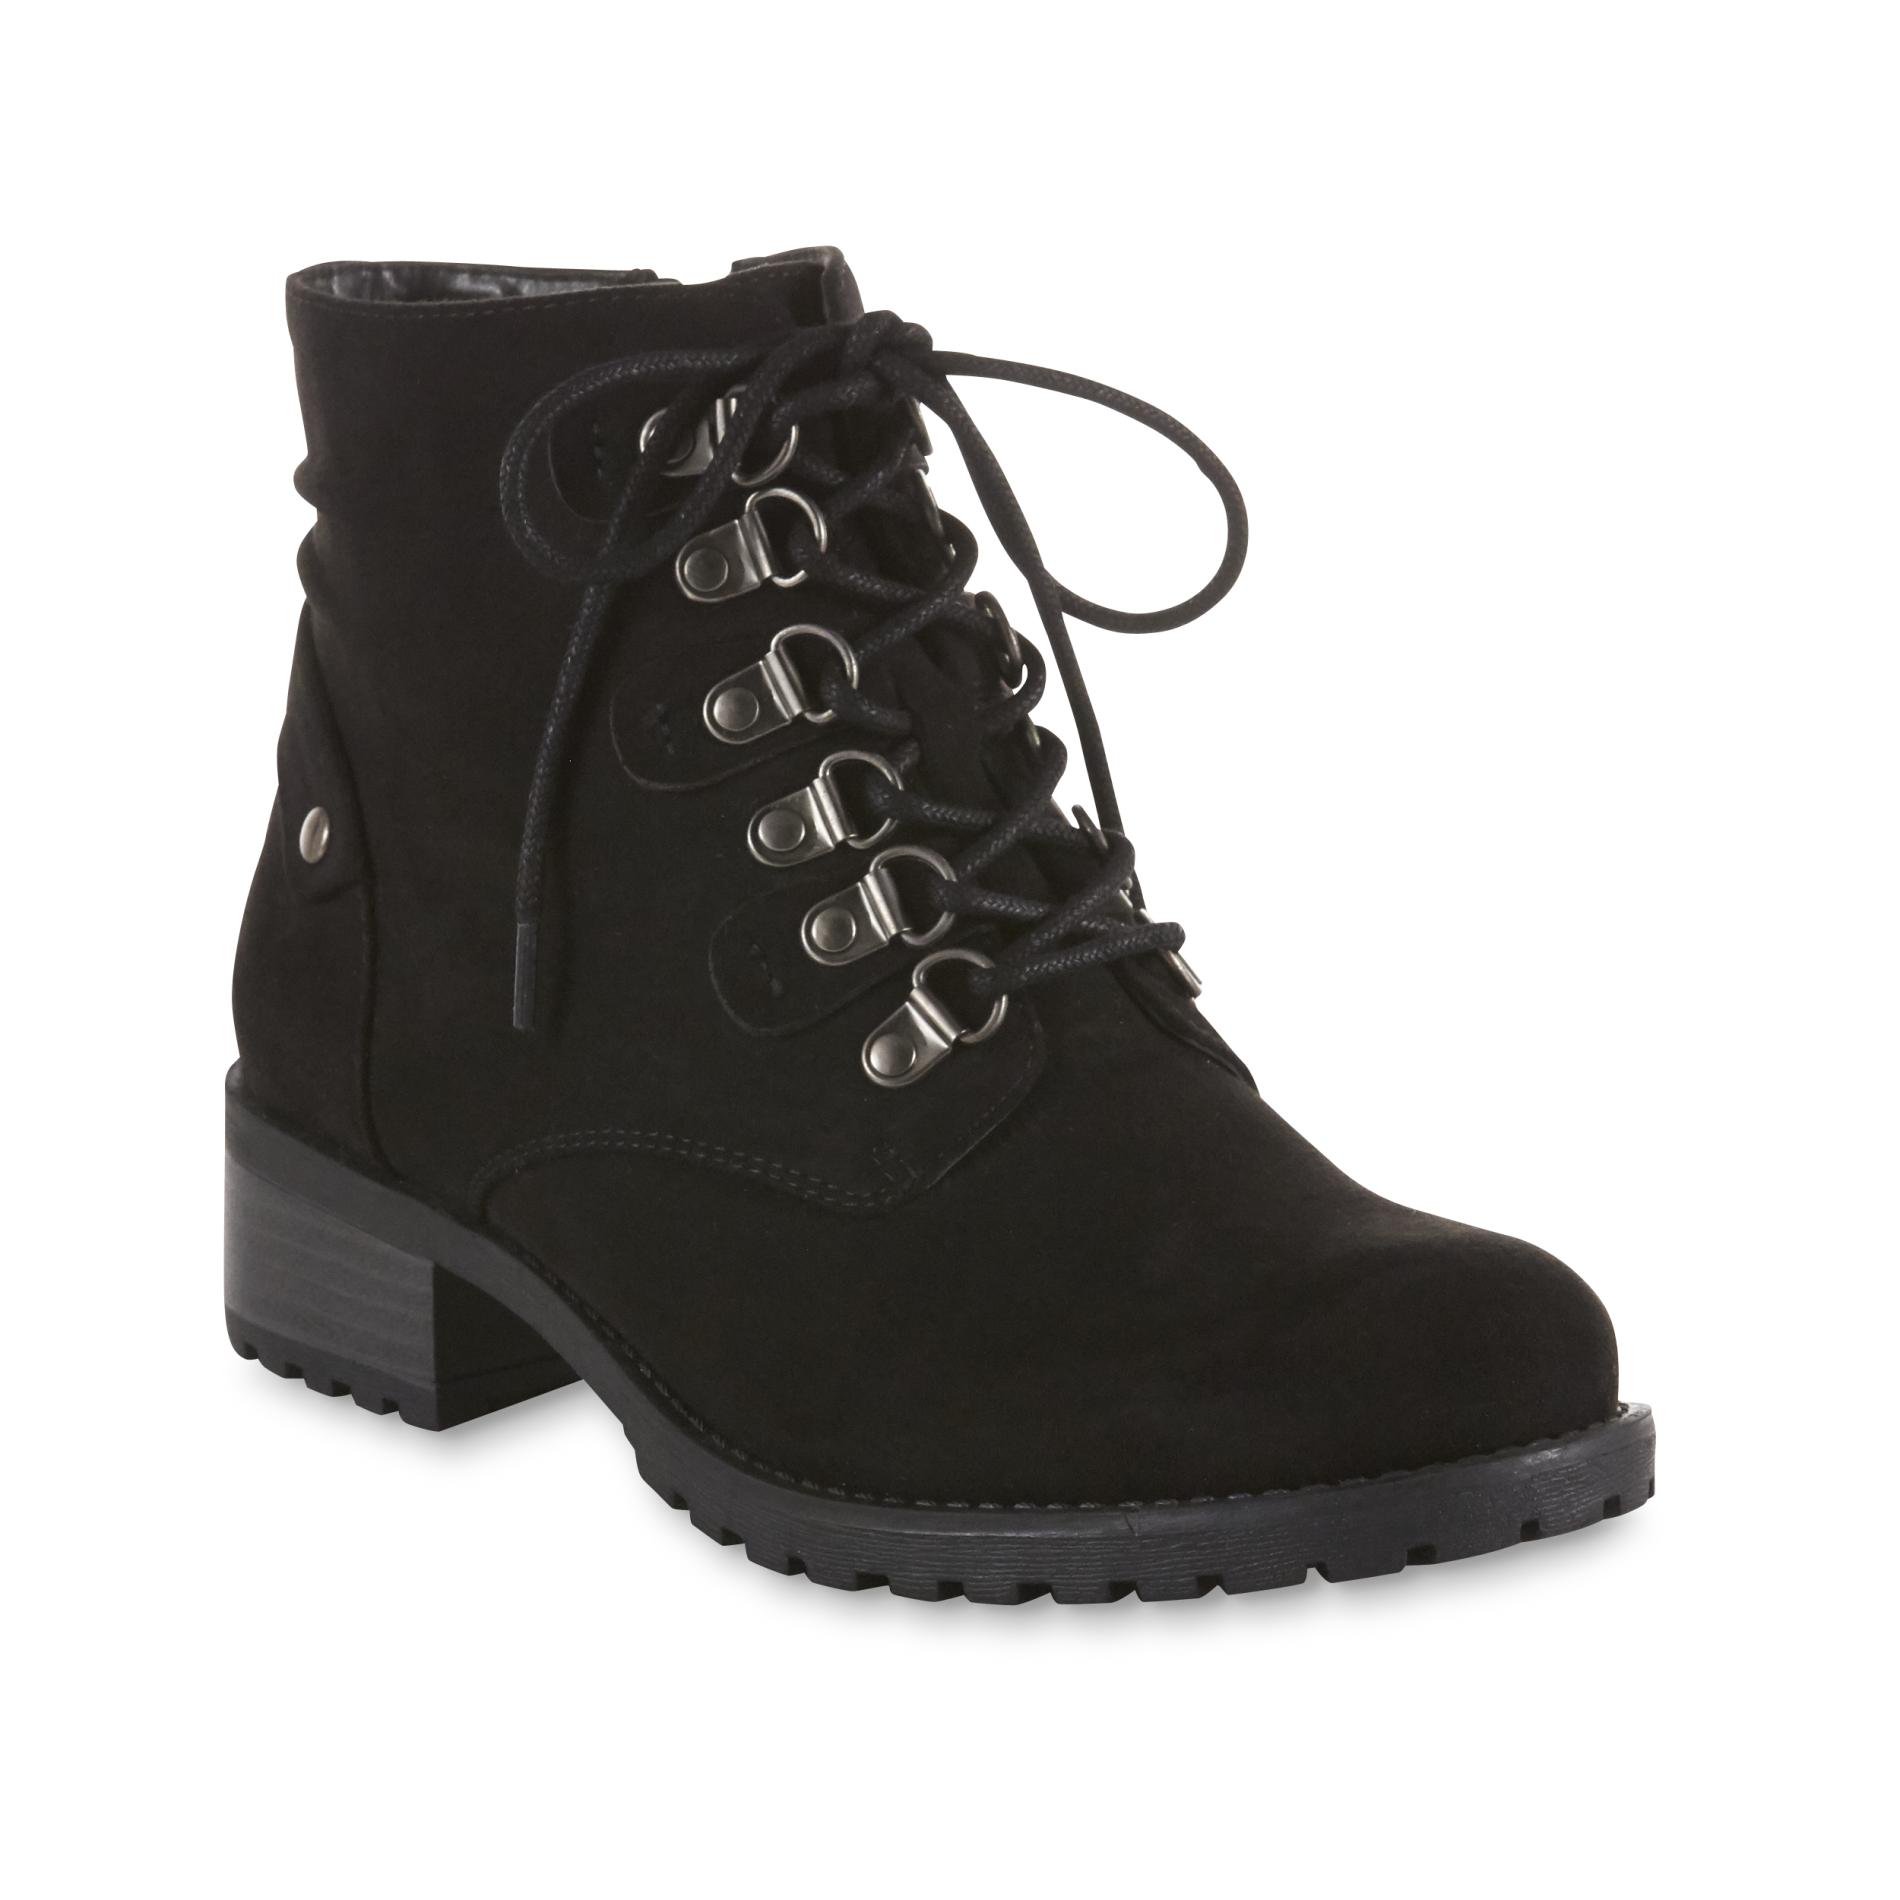 Metaphor Women's Zara Lace-Up Ankle Boot - Black